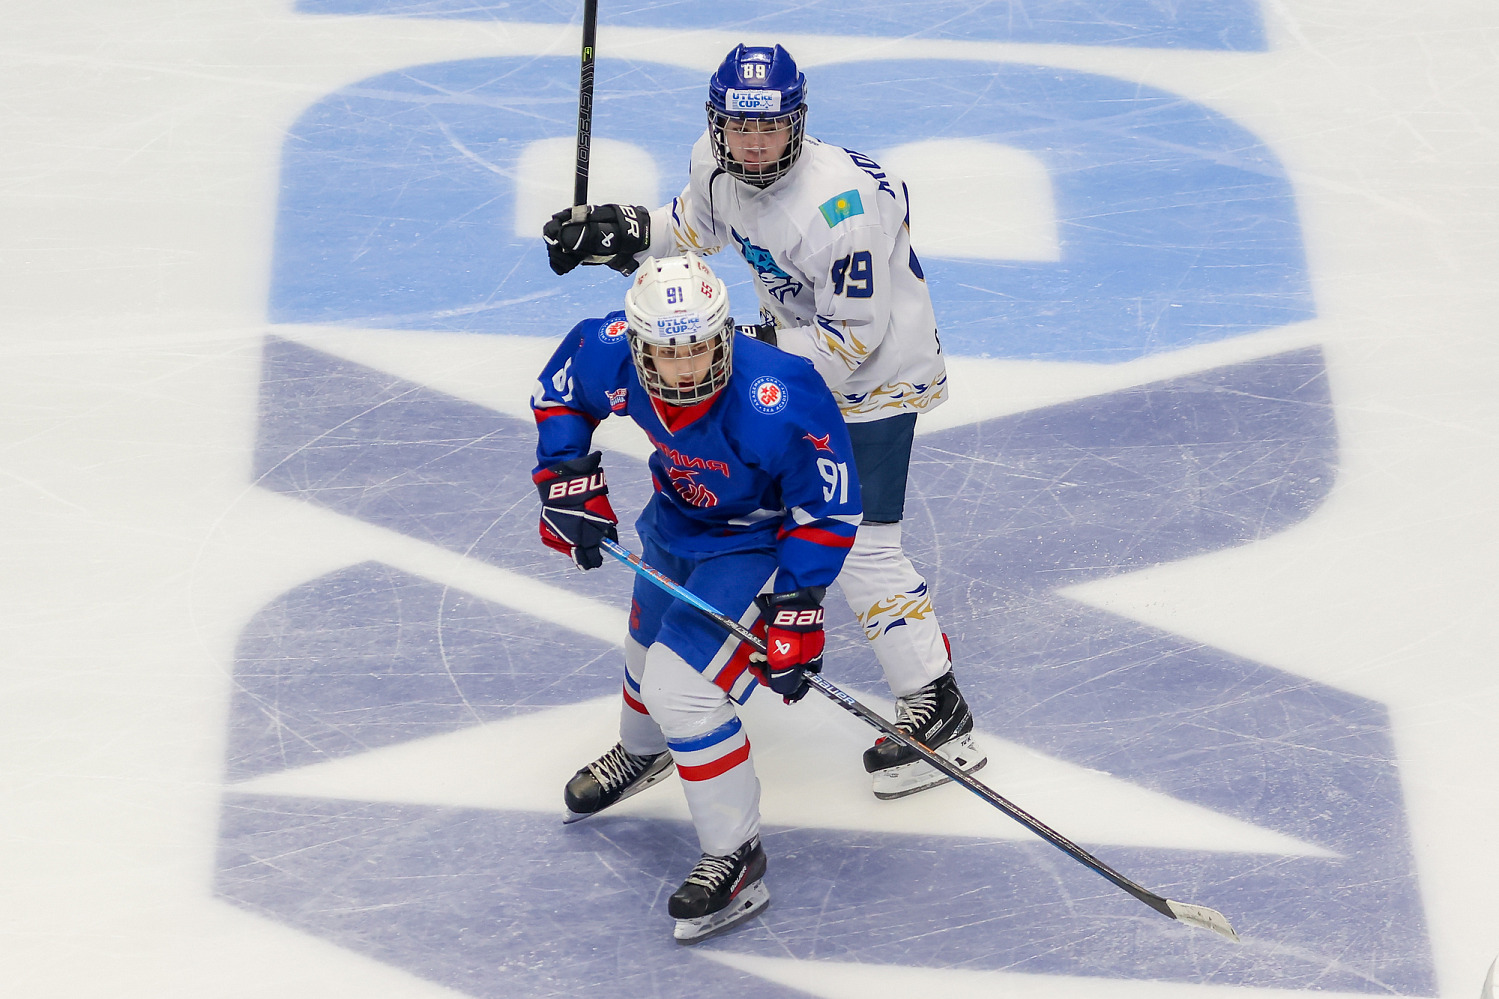 Lokomotiv and SKA Army reached the final, Barys will fight for the third place of UTLC Ice Cup